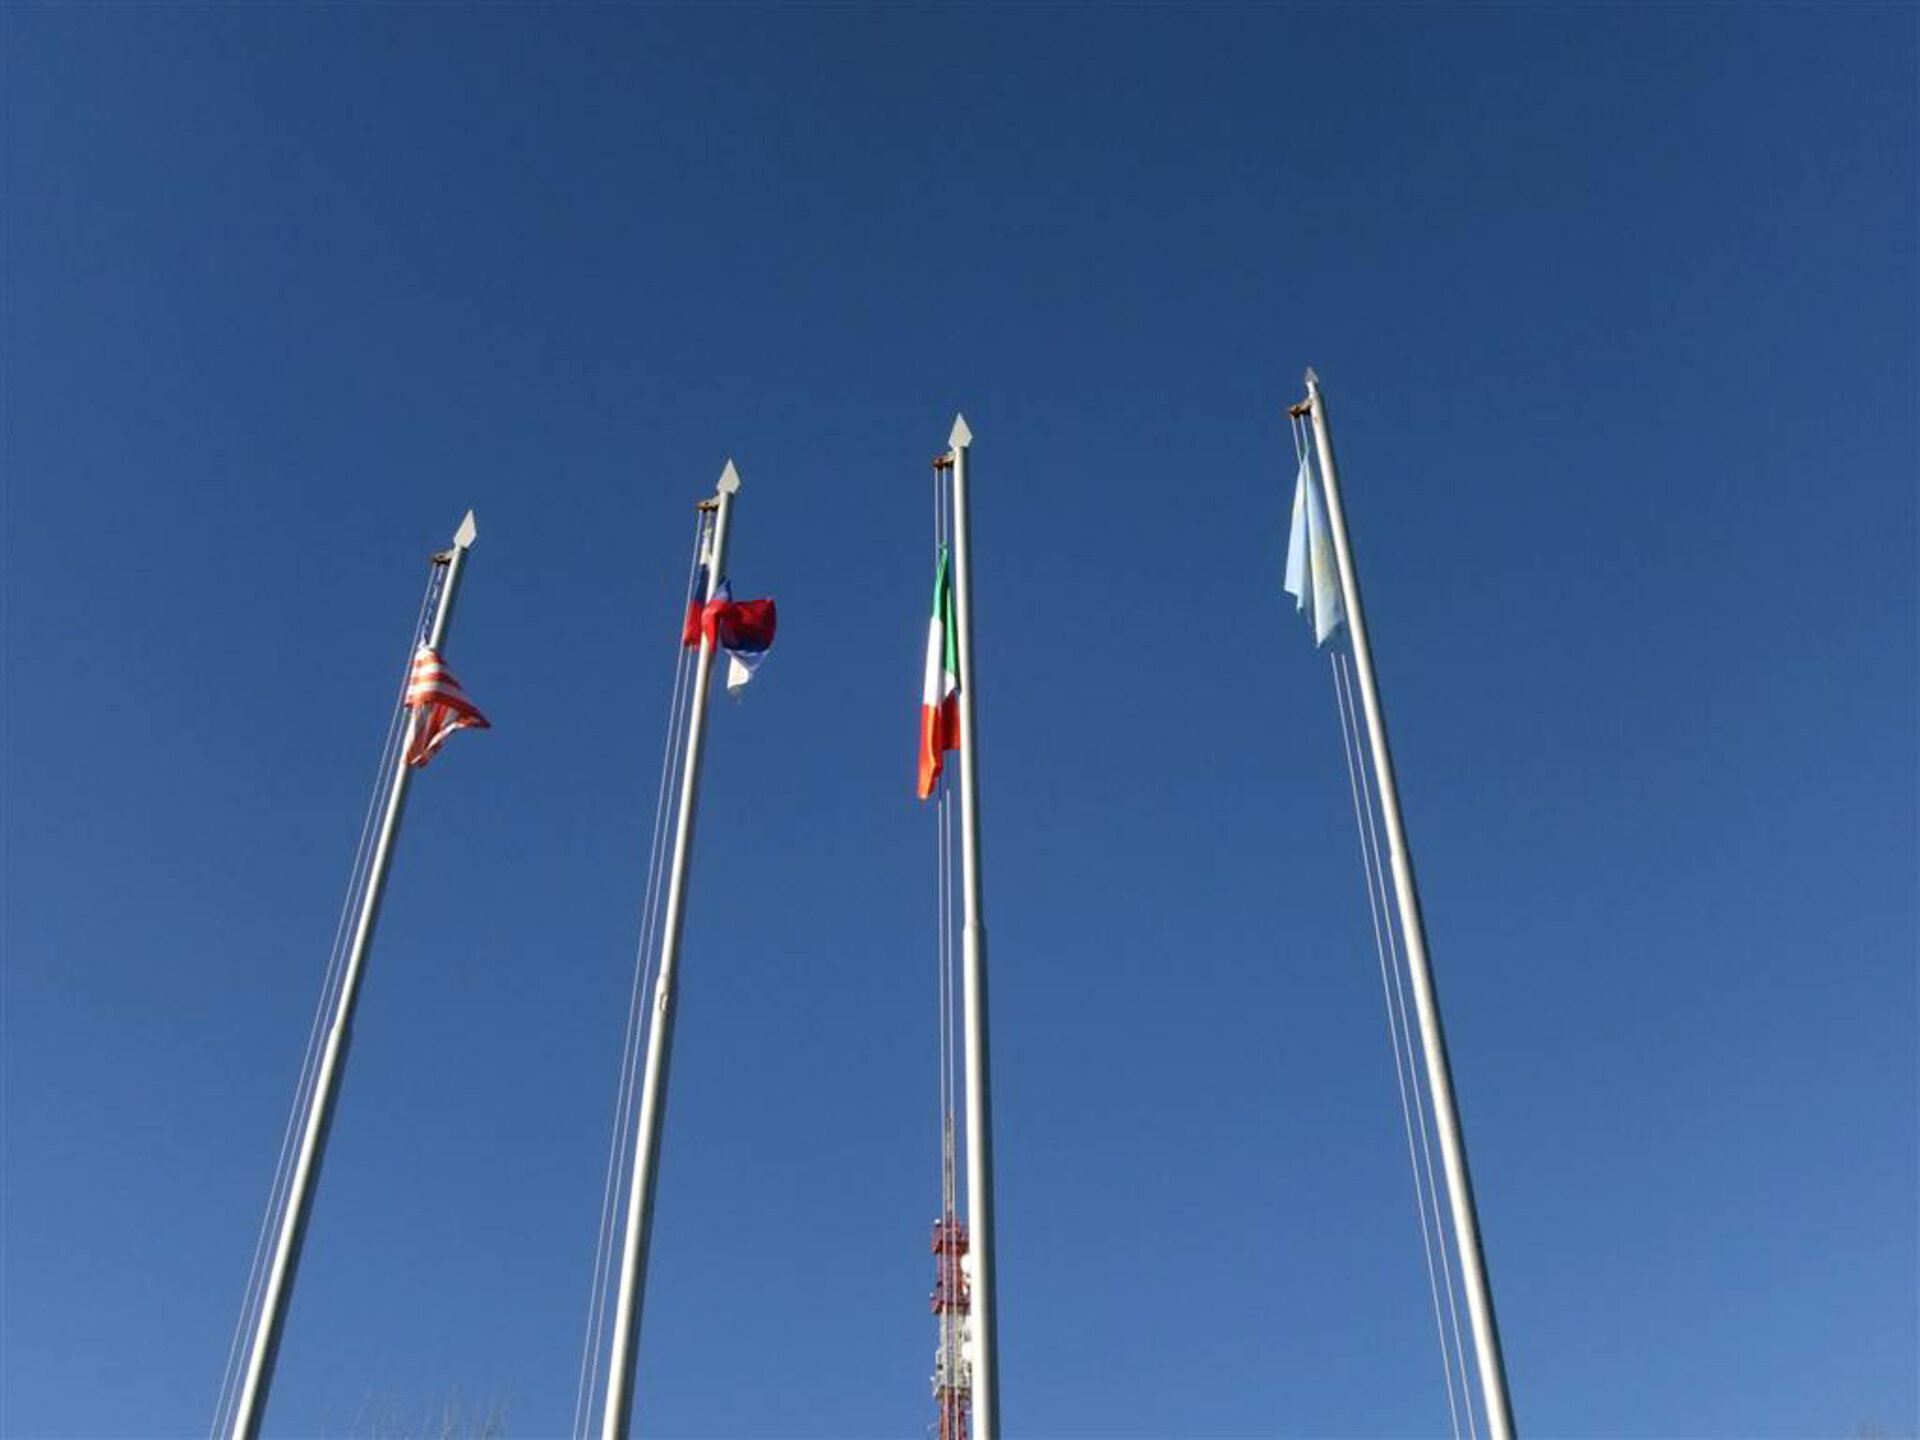 Raising of the flags